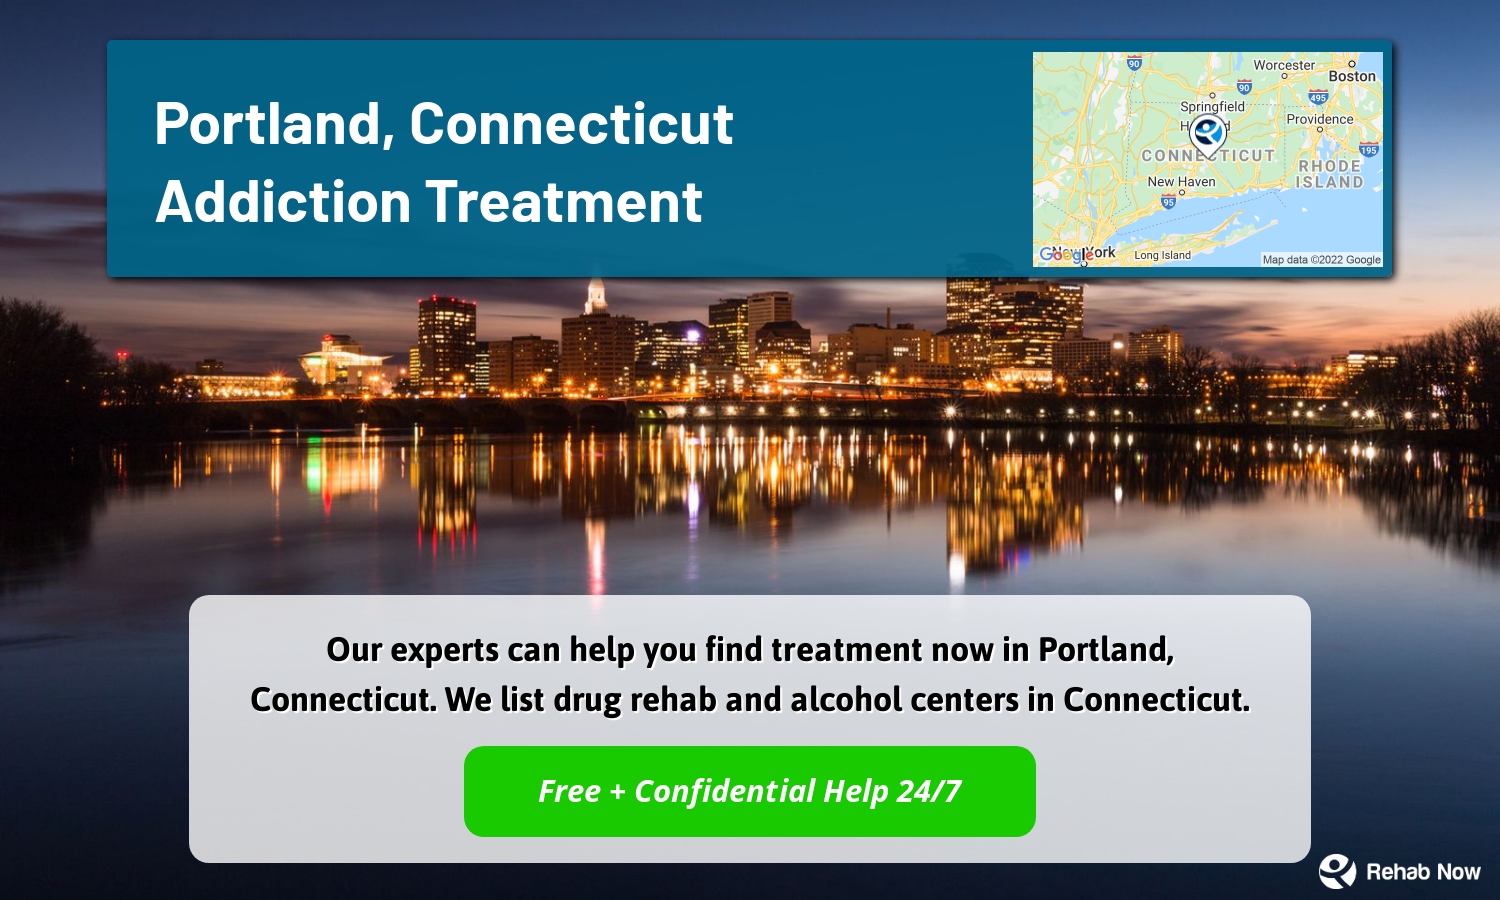 Our experts can help you find treatment now in Portland, Connecticut. We list drug rehab and alcohol centers in Connecticut.